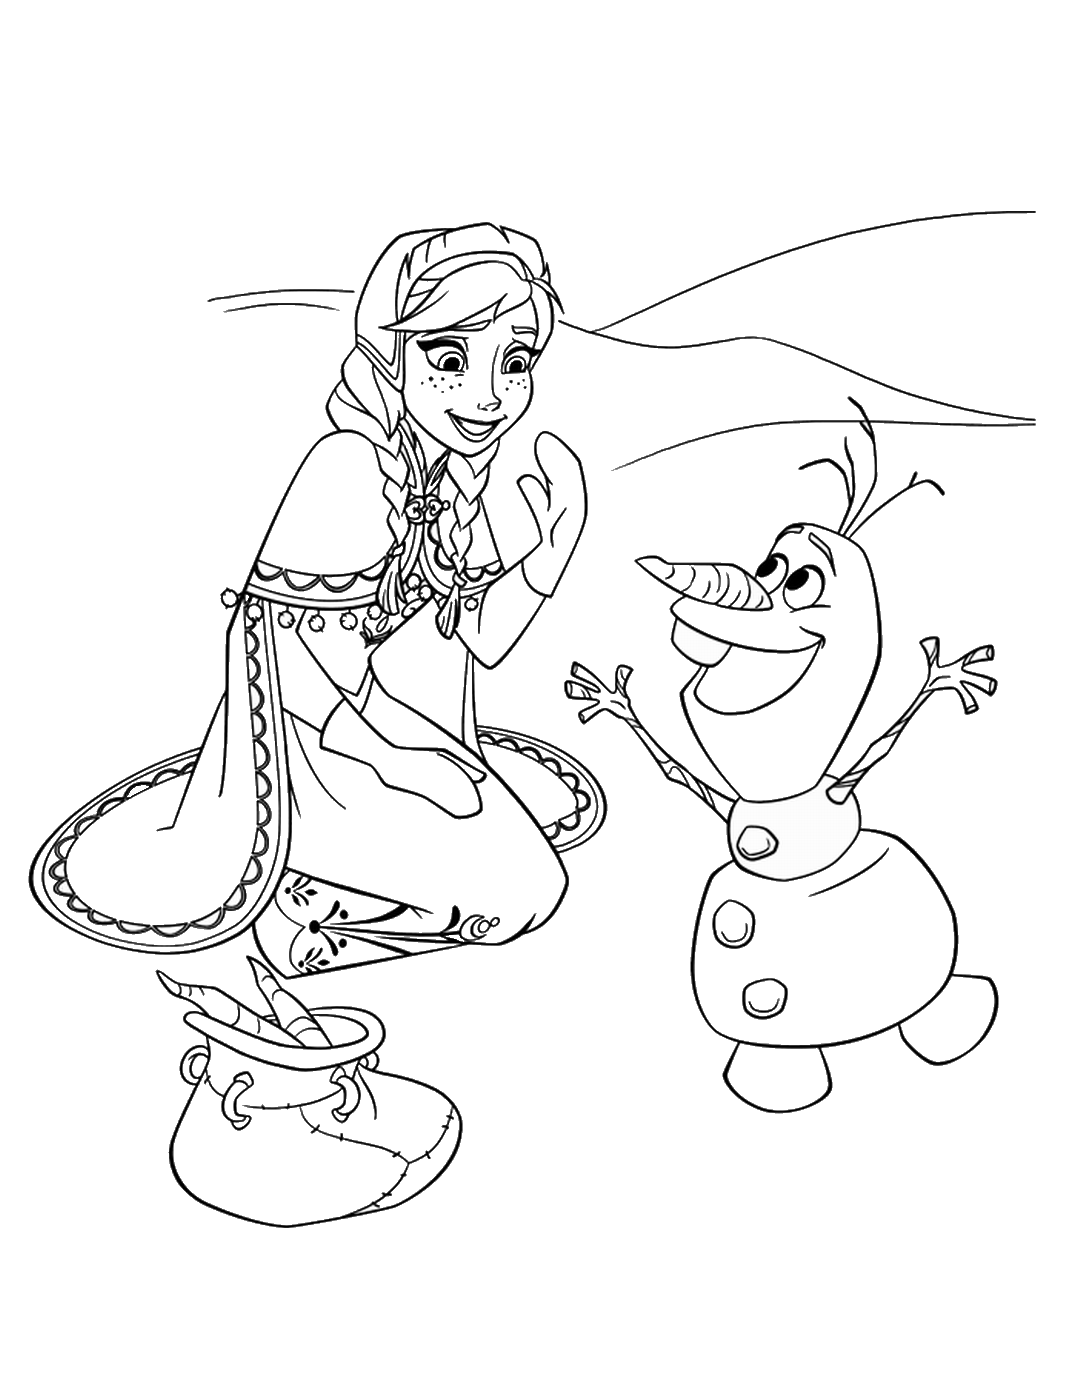 anna coloring pages with olaf Coloring4free